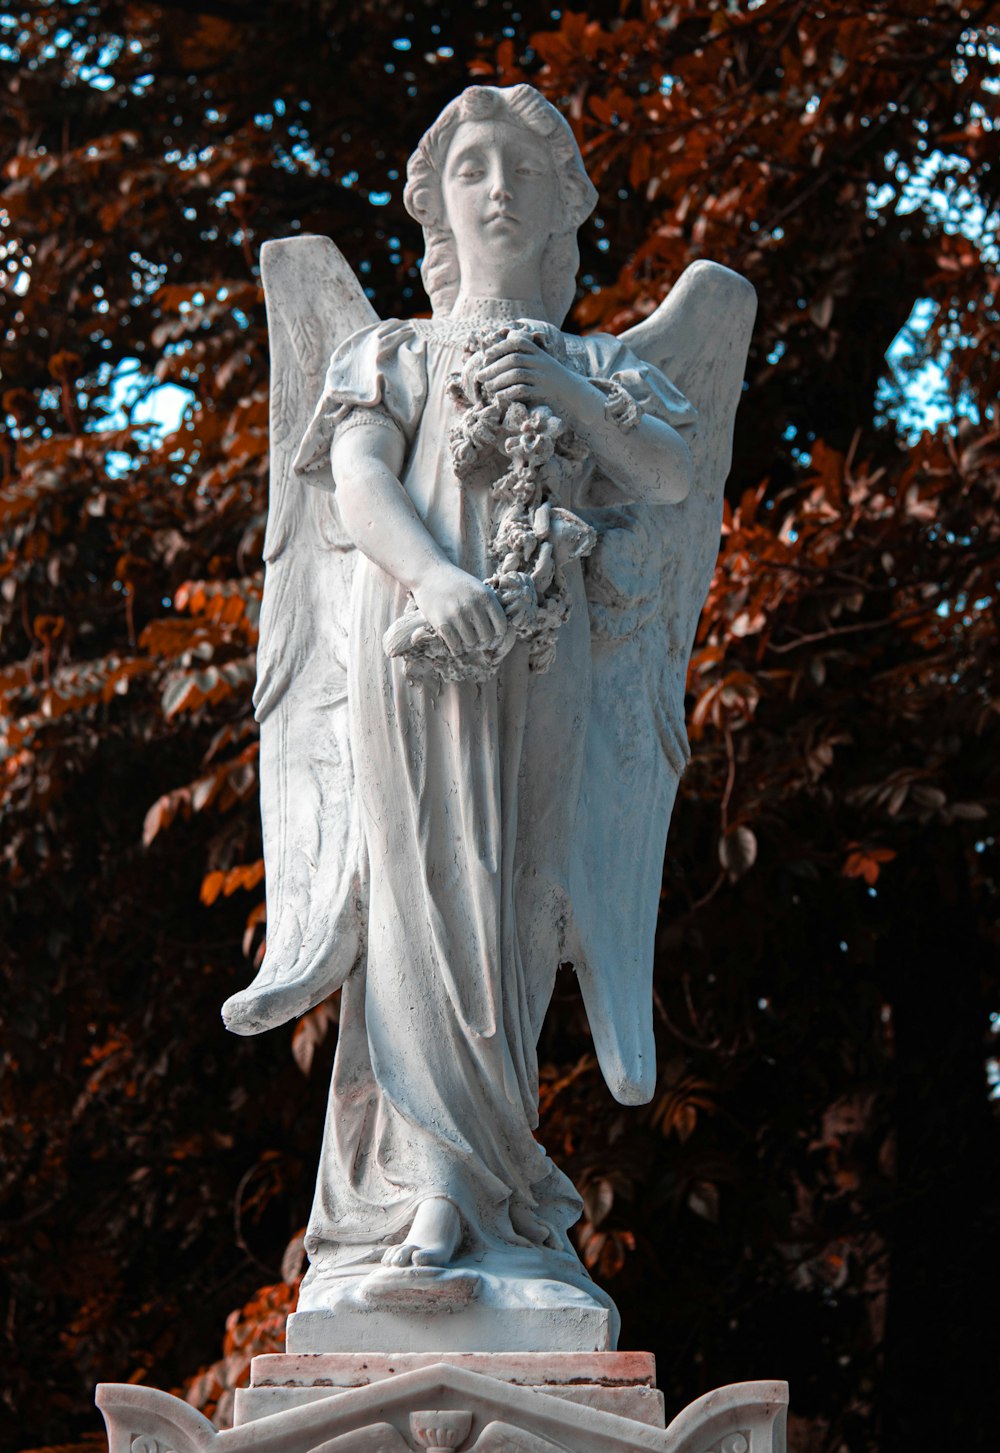 angel statue in close up photography